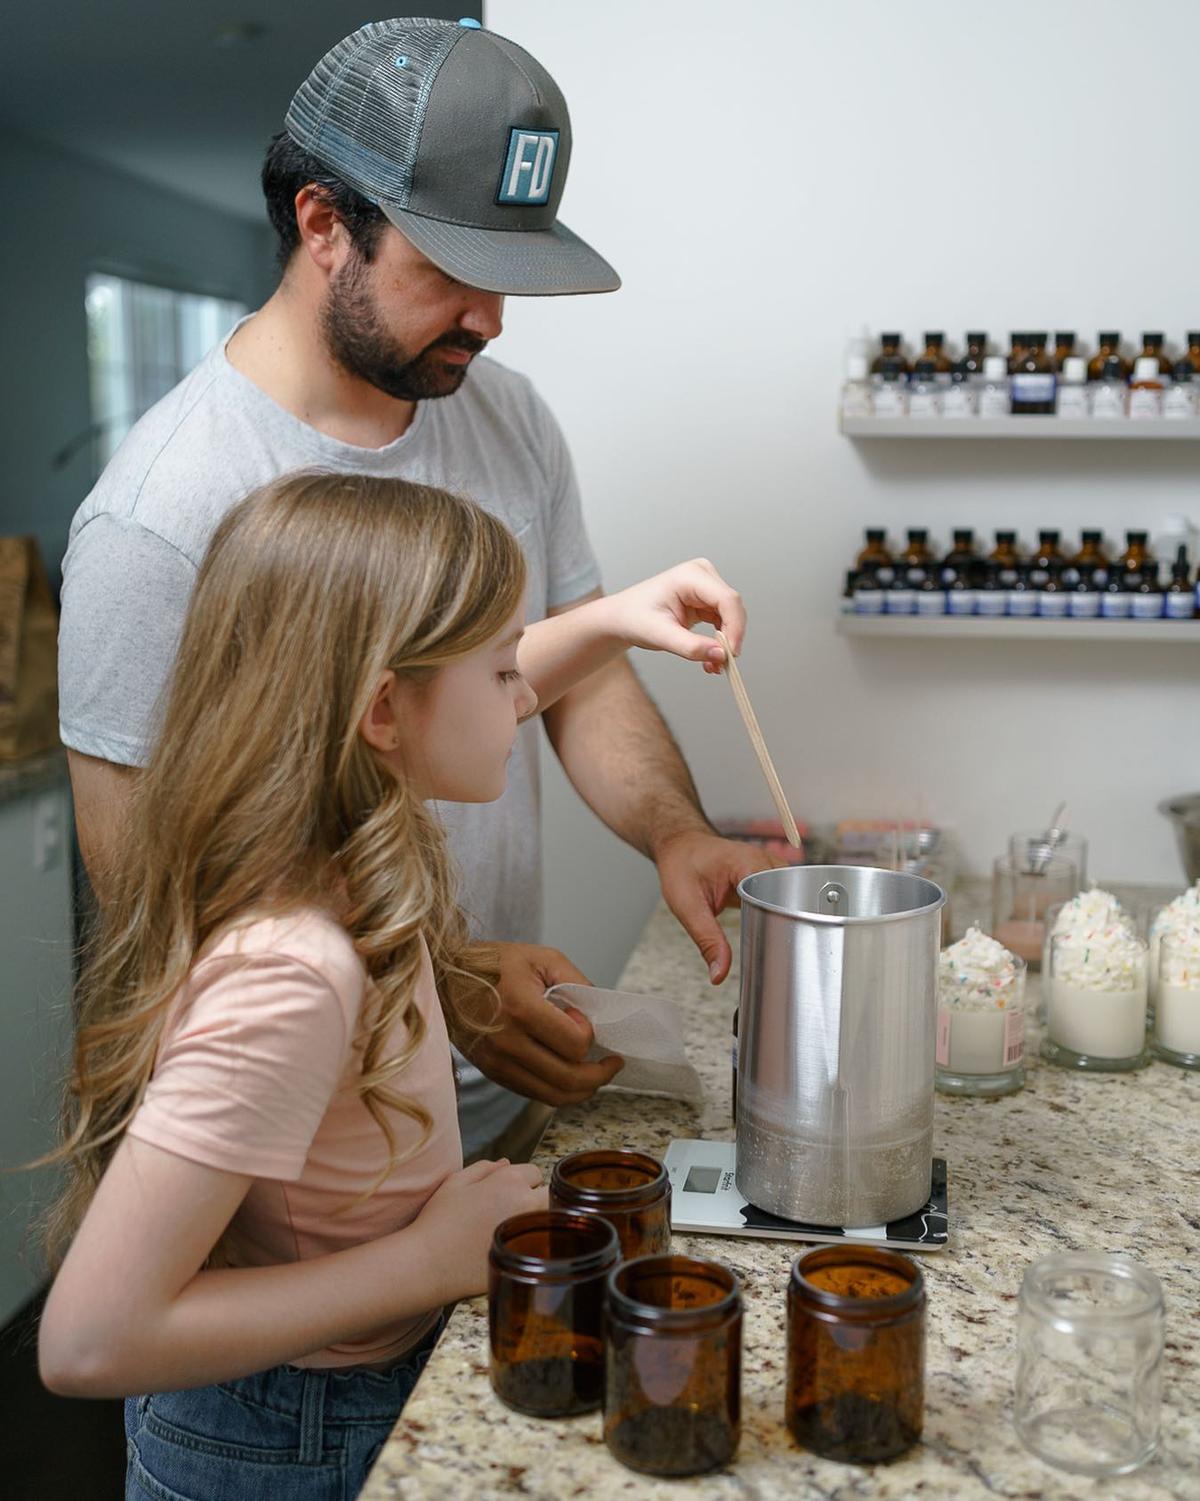 Lily and her dad, Sergio Moreno, making the candles. (Courtesy of <a href="https://www.instagram.com/lilylousaromas/">Lily Lou’s Aromas</a>)